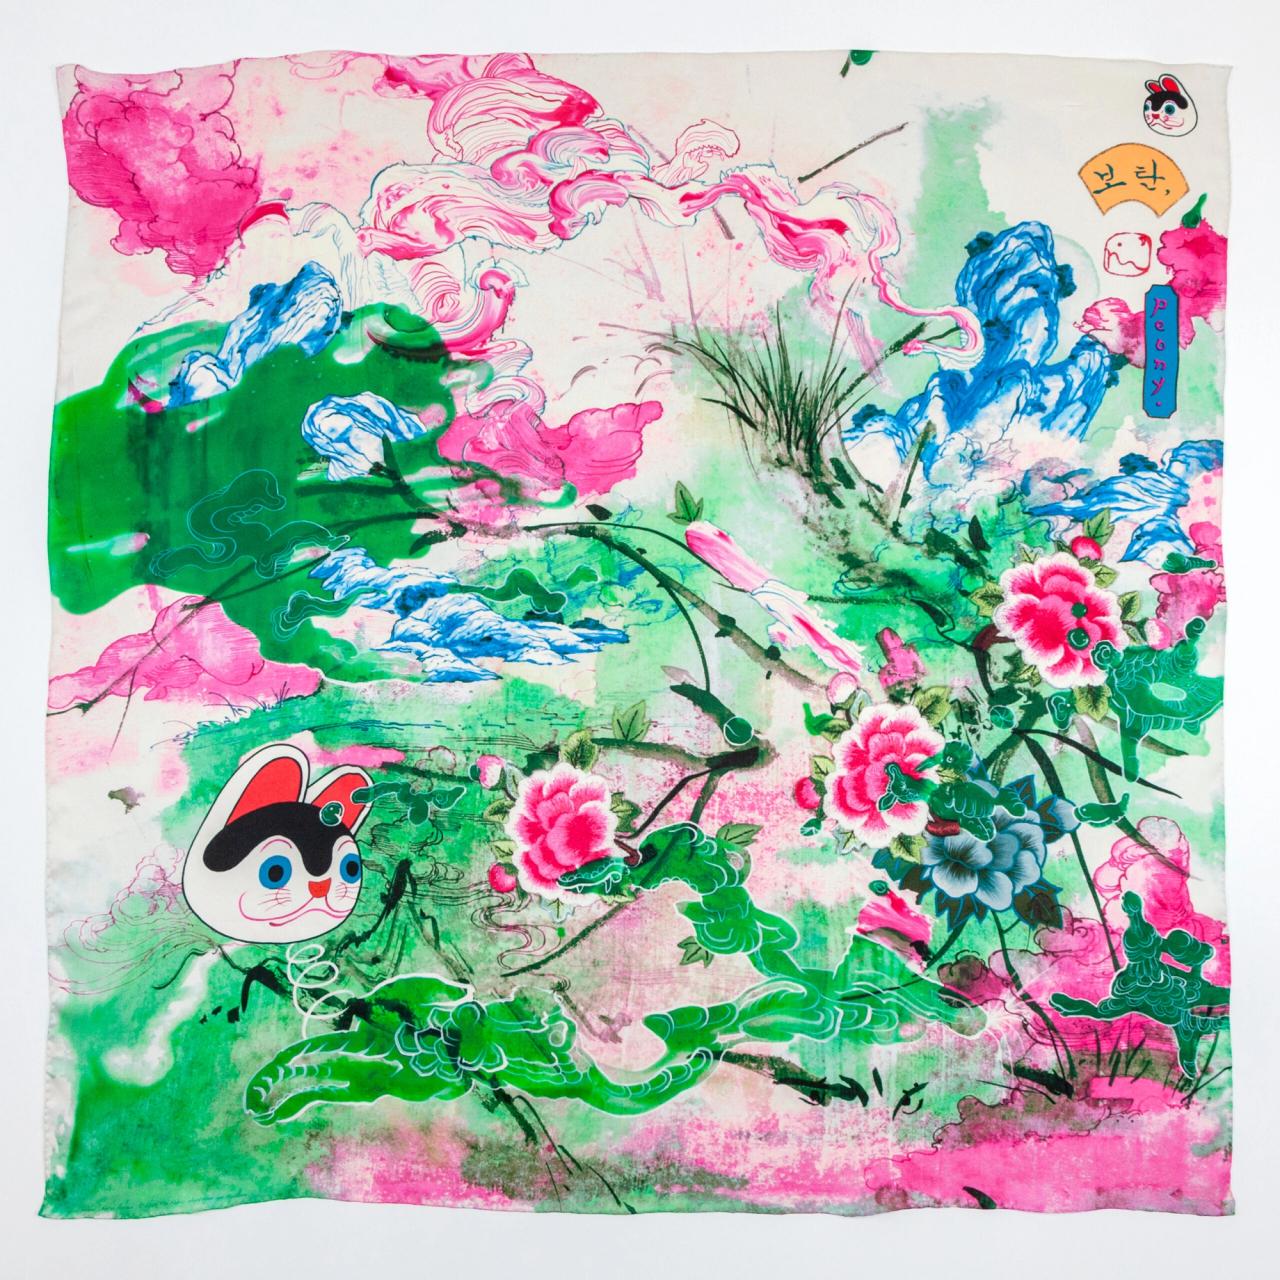 A square scarf with fluid ink drawings of pink, green, and blue clouds, intersect with drawings of mountains and peonies in an East Asian style. A drawing of a cartoon cat head floats on the left. 